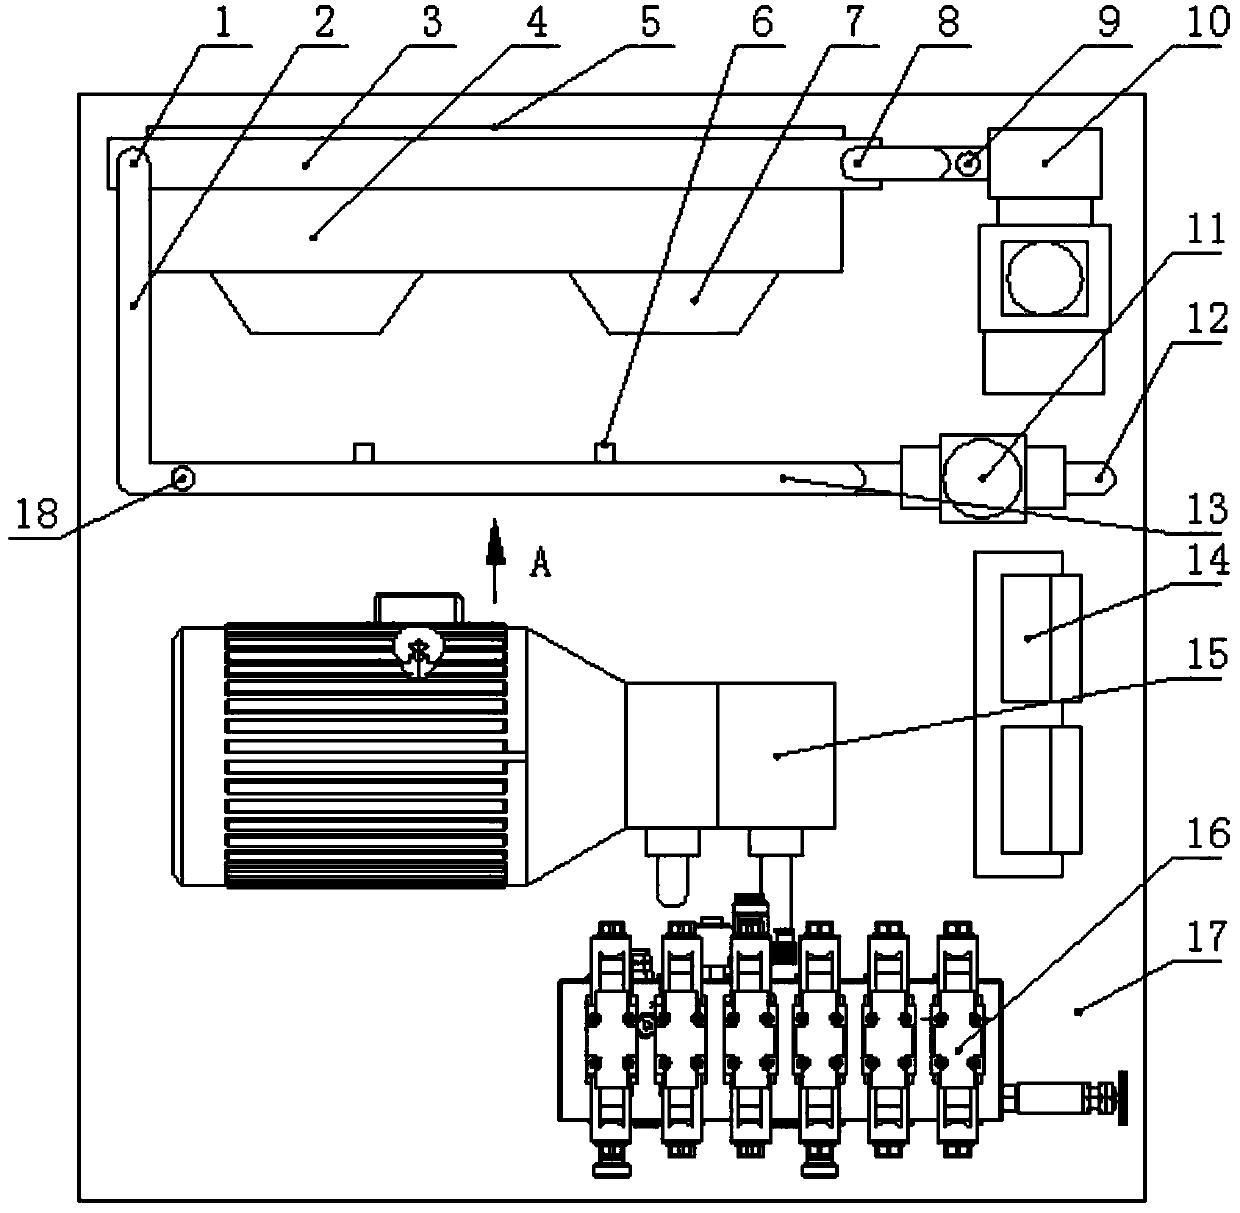 Air-cooled oil cooling system capable of automatically detecting temperature